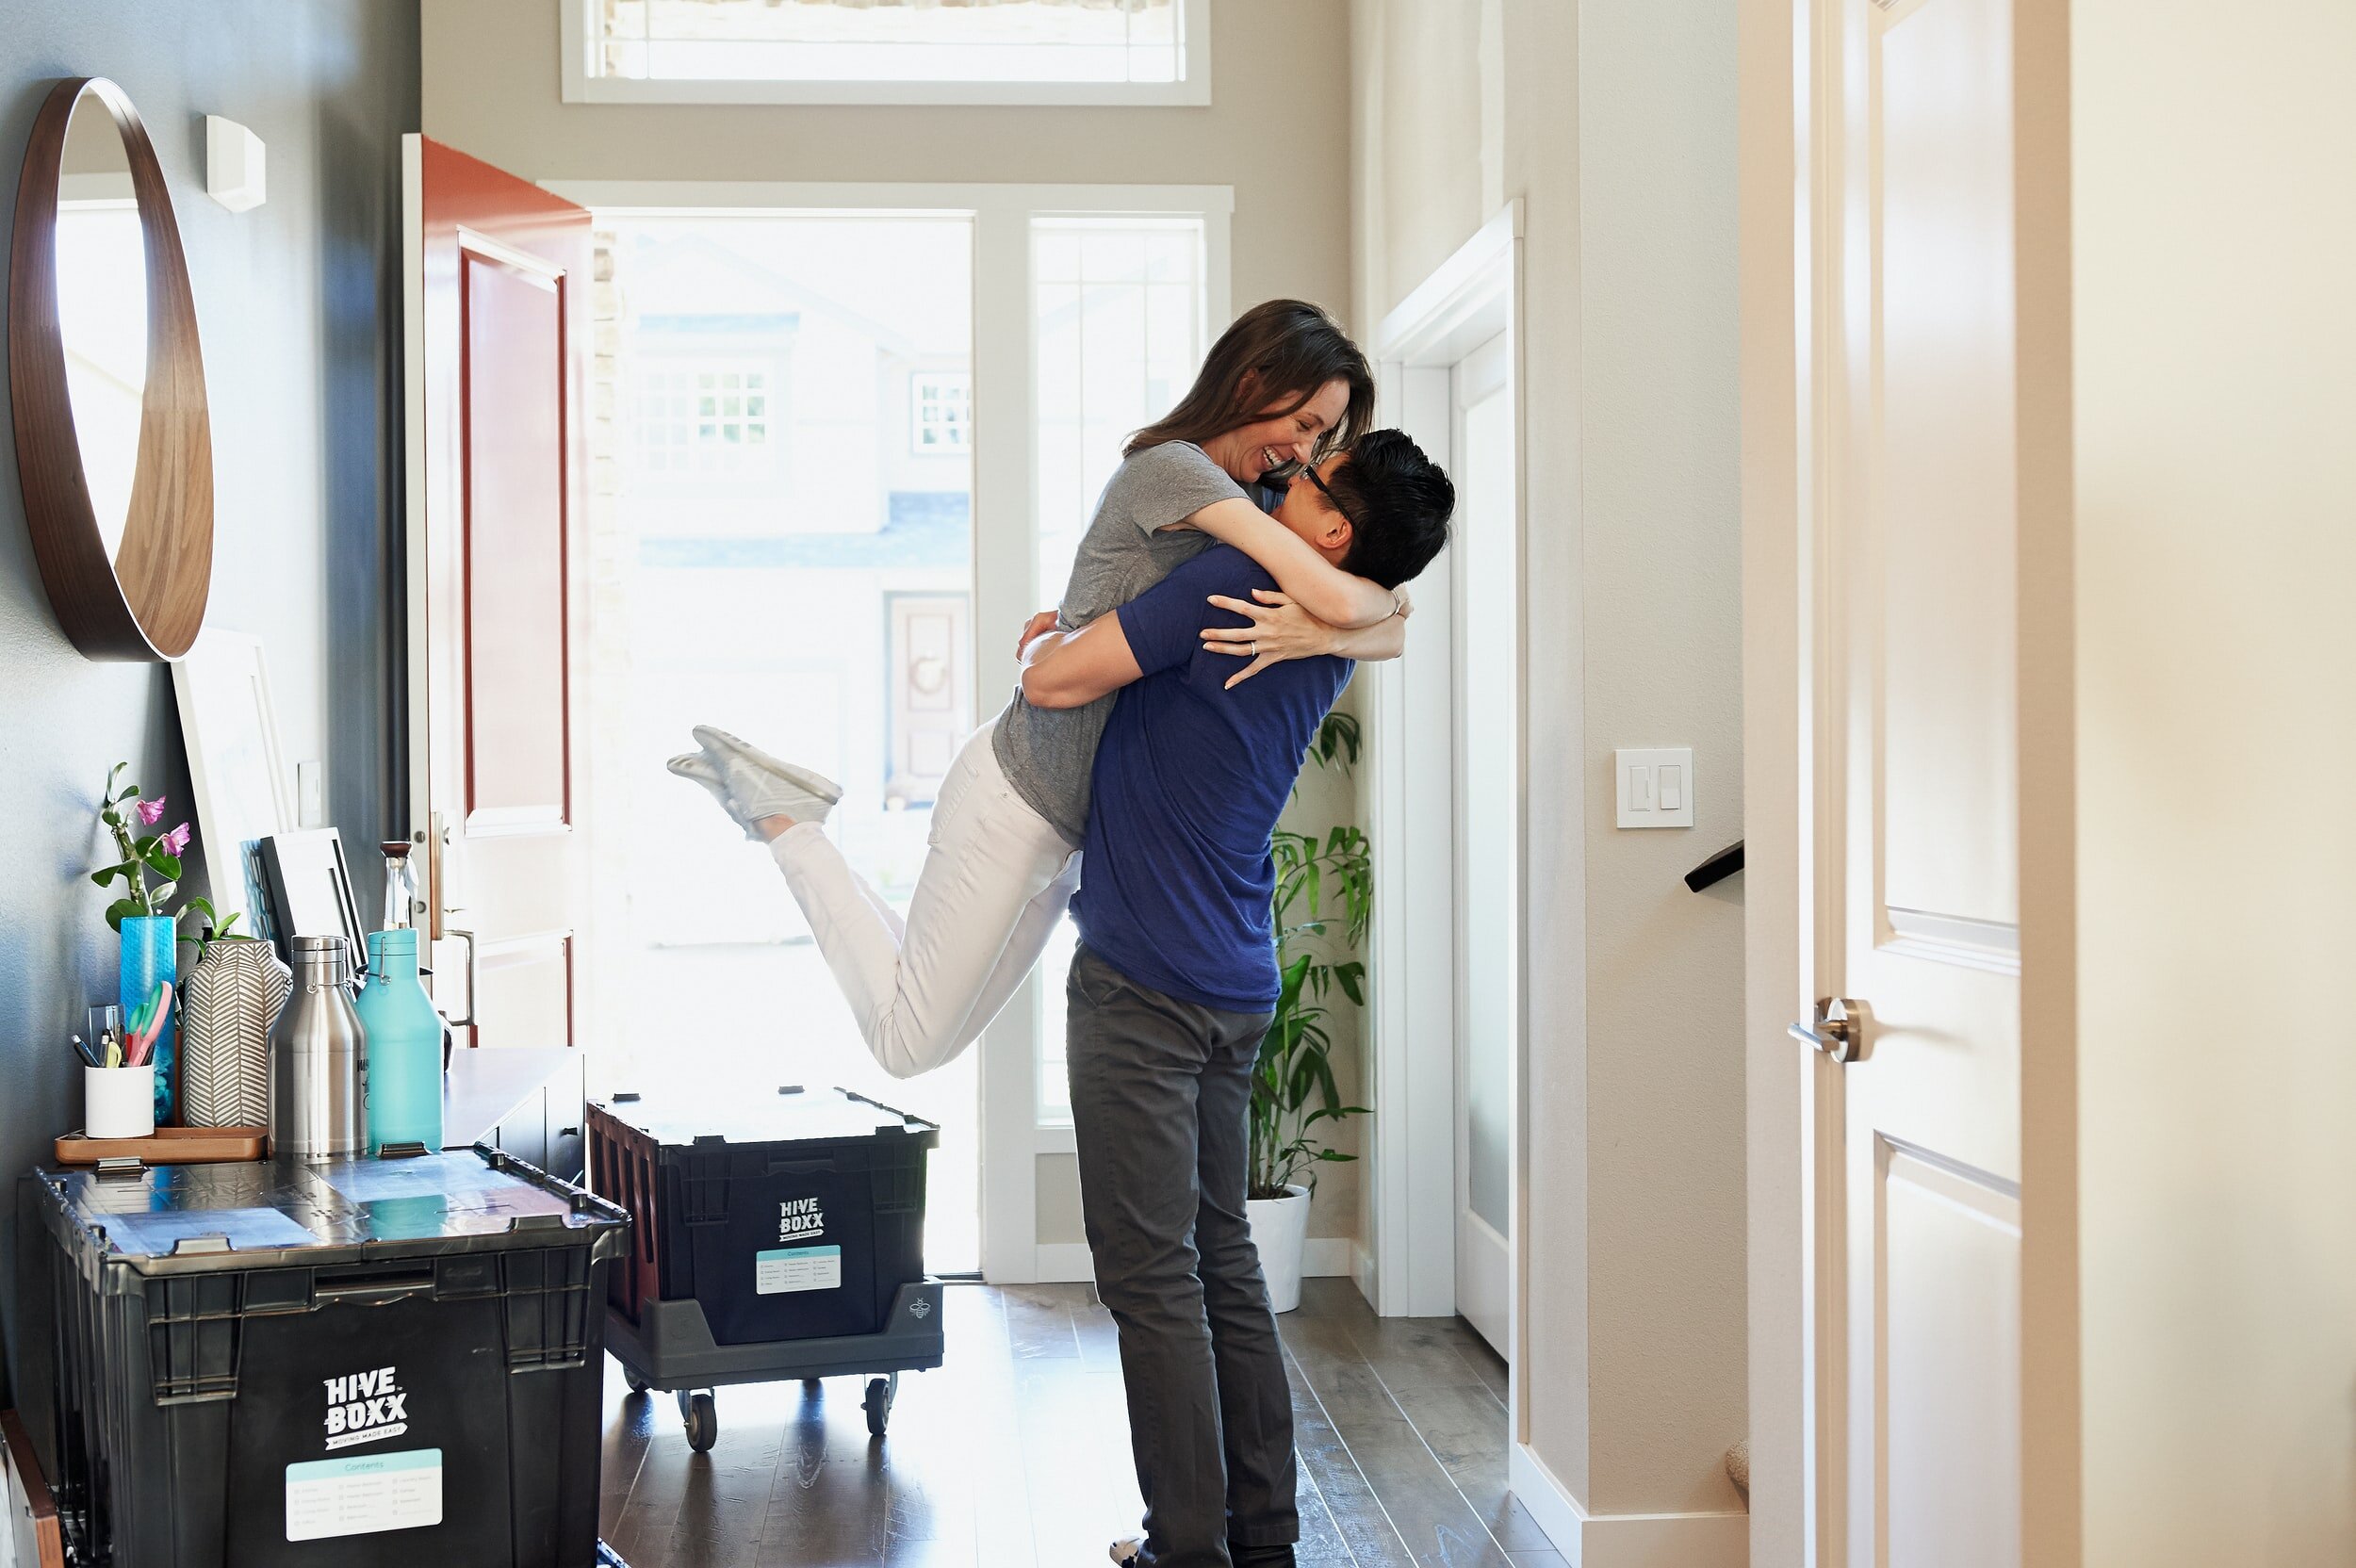   MOVING IN OR GETTING MARRIED?&nbsp;   Loving Prenups &amp; Cohabitation Agreements   Get Started  